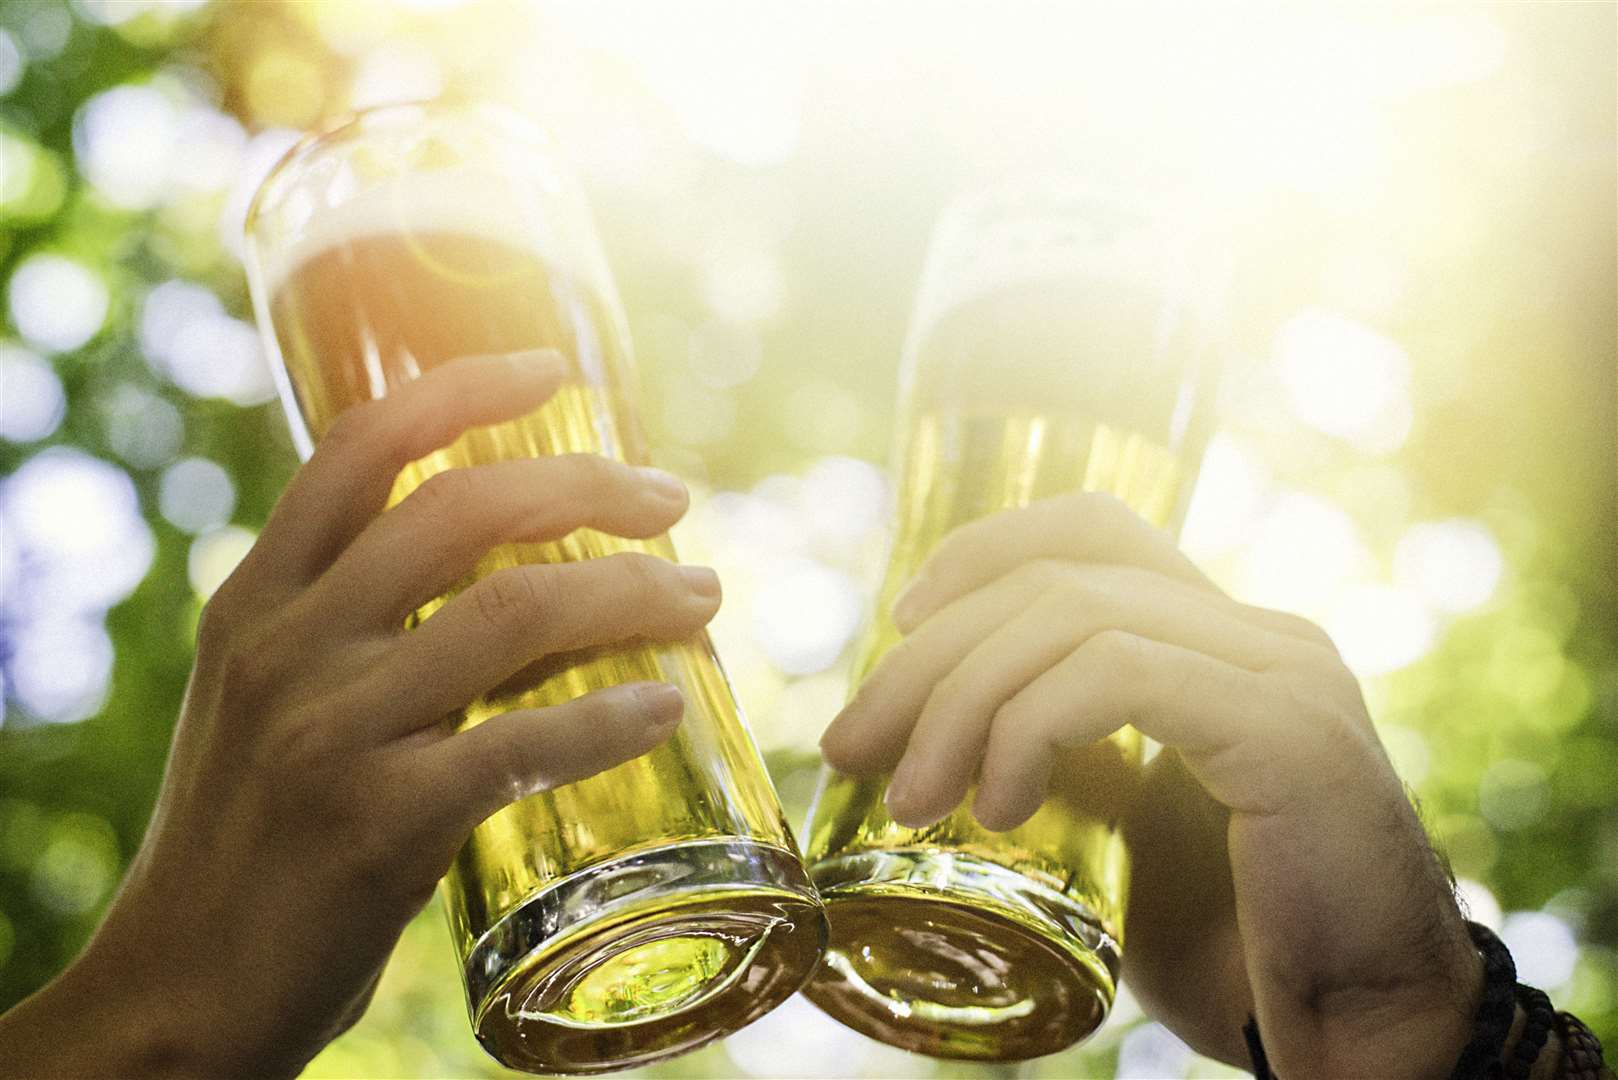 The offer suggests people can claim free beer to celebrate Father's Day. Photo: iStock image.